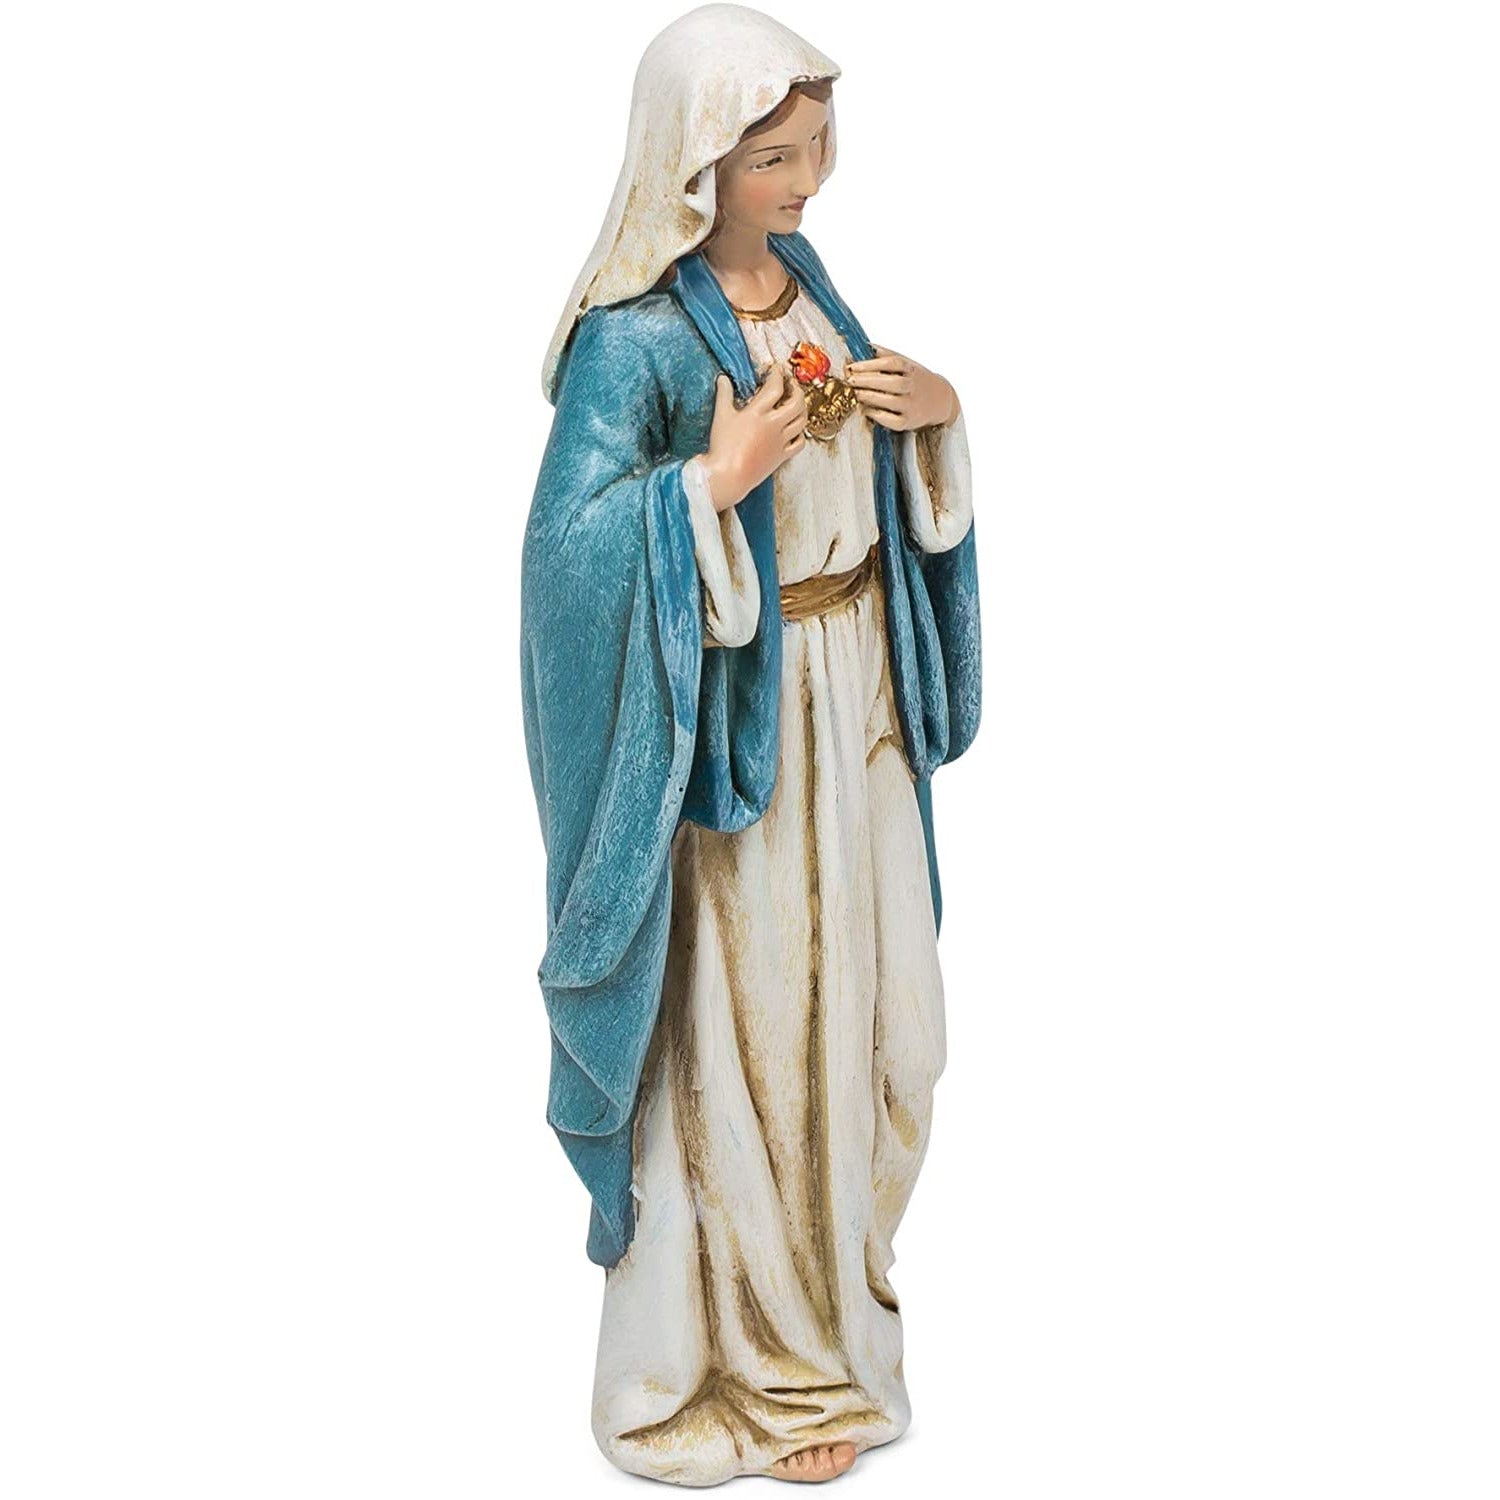 Renaissance Collection Joseph's Studio by Roman Exclusive Immaculate Heart of Mary Figurine, 6-Inch